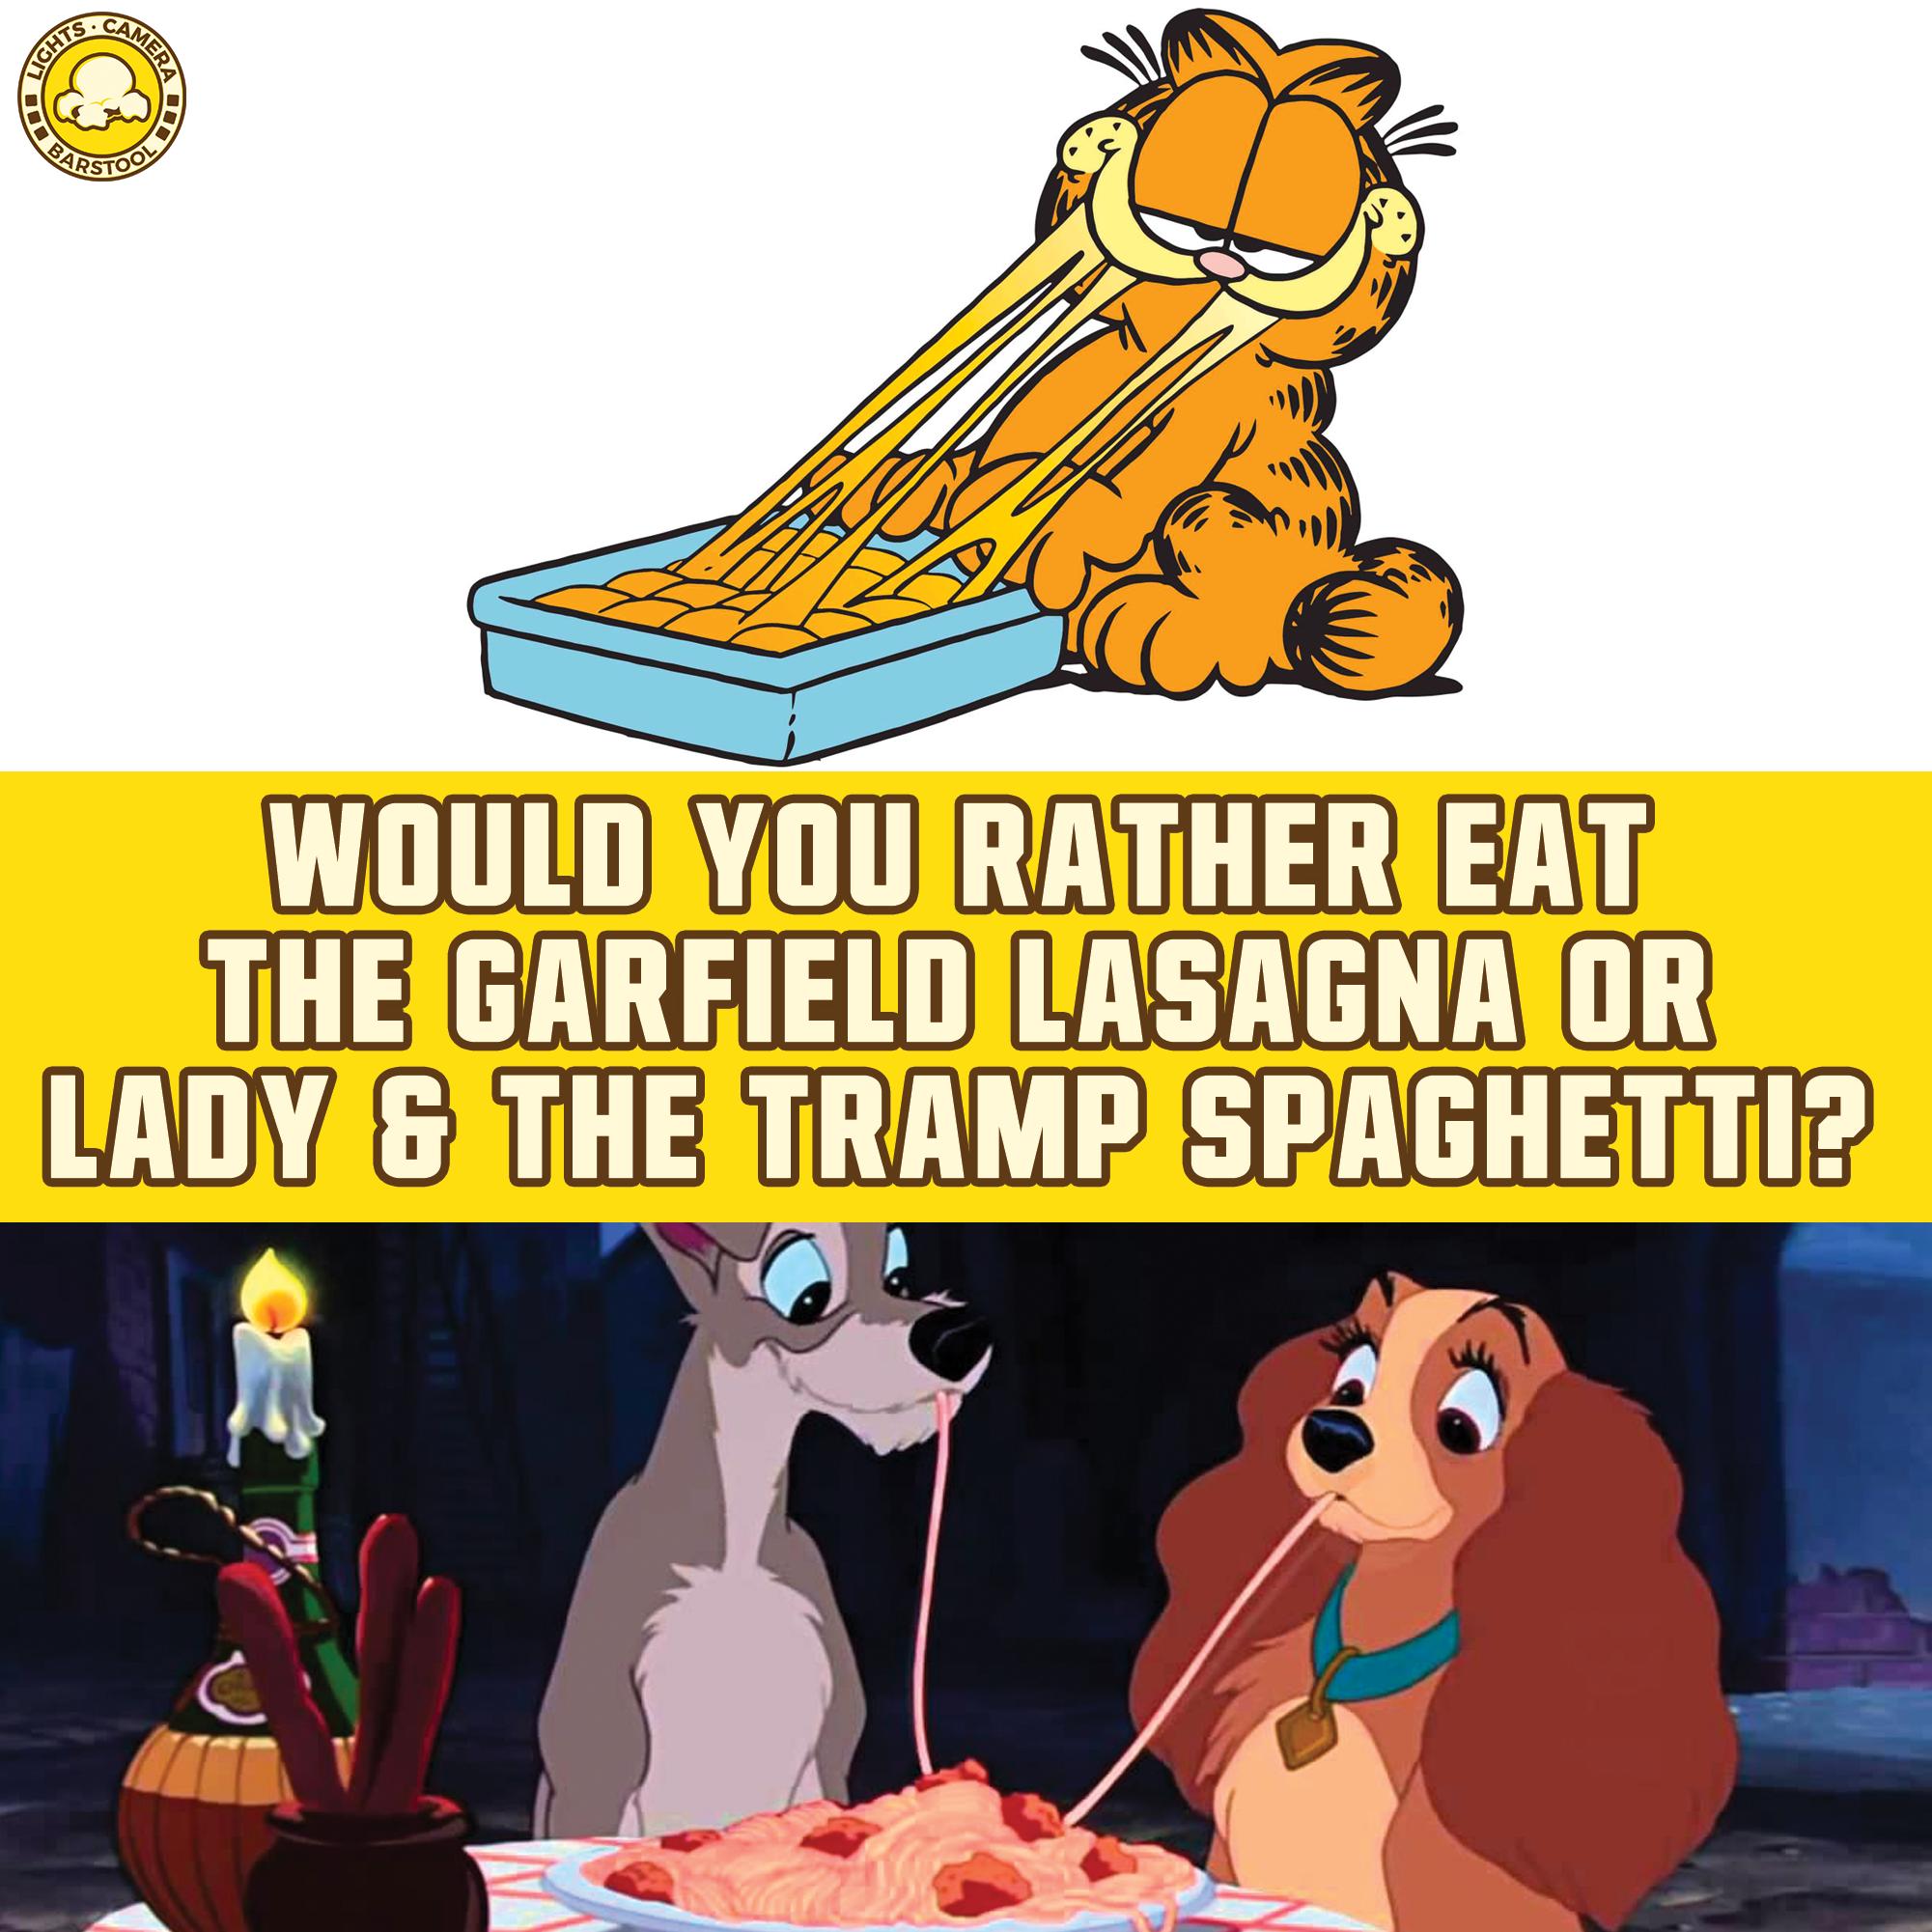 Lights Camera Pod On Twitter Would You Rather Eat The Lasagna